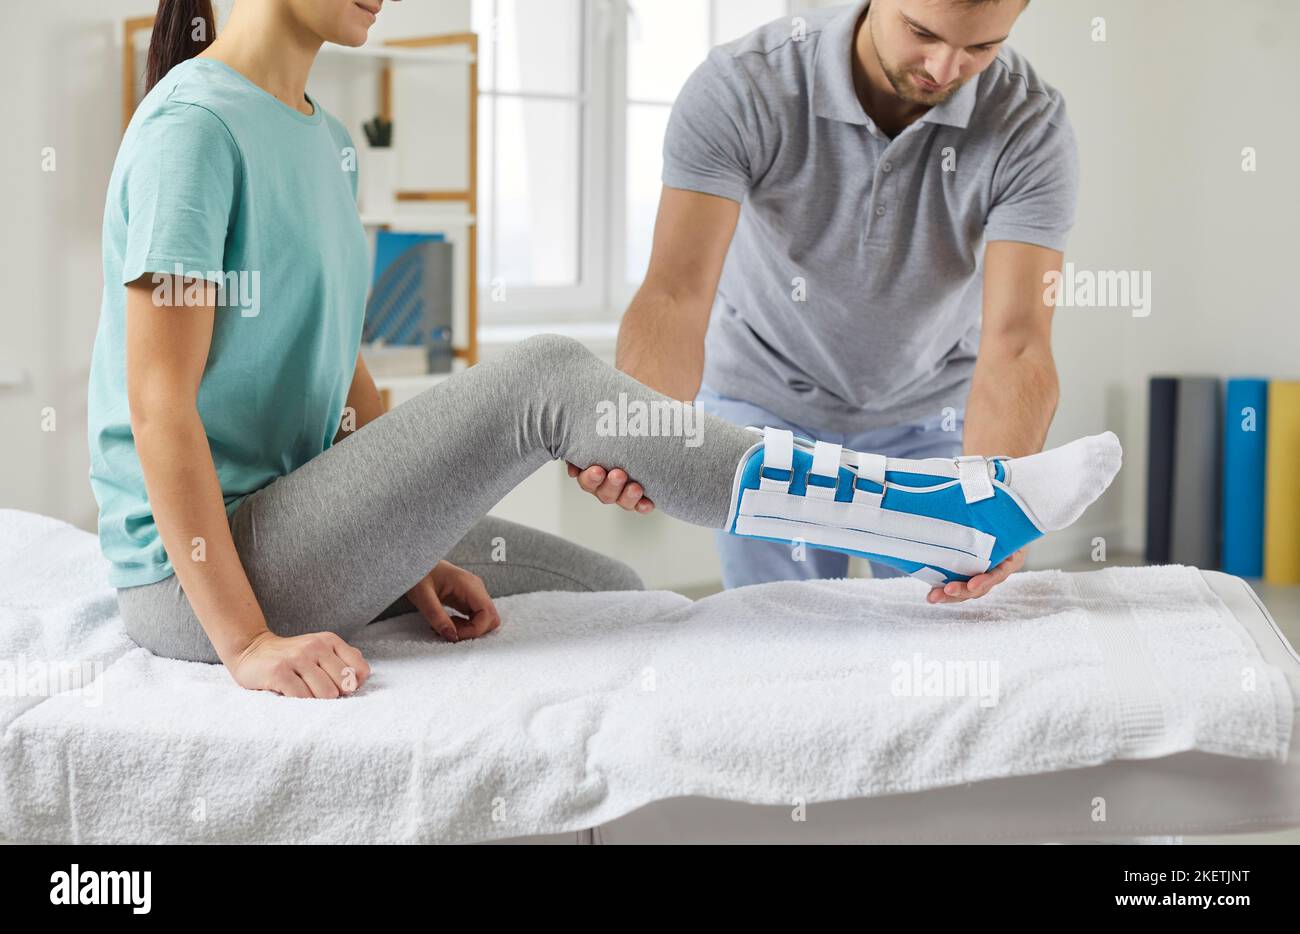 Male physiotherapist helps a woman put on a shin splint after leg surgery during rehabilitation medical consultation. Stock Photo